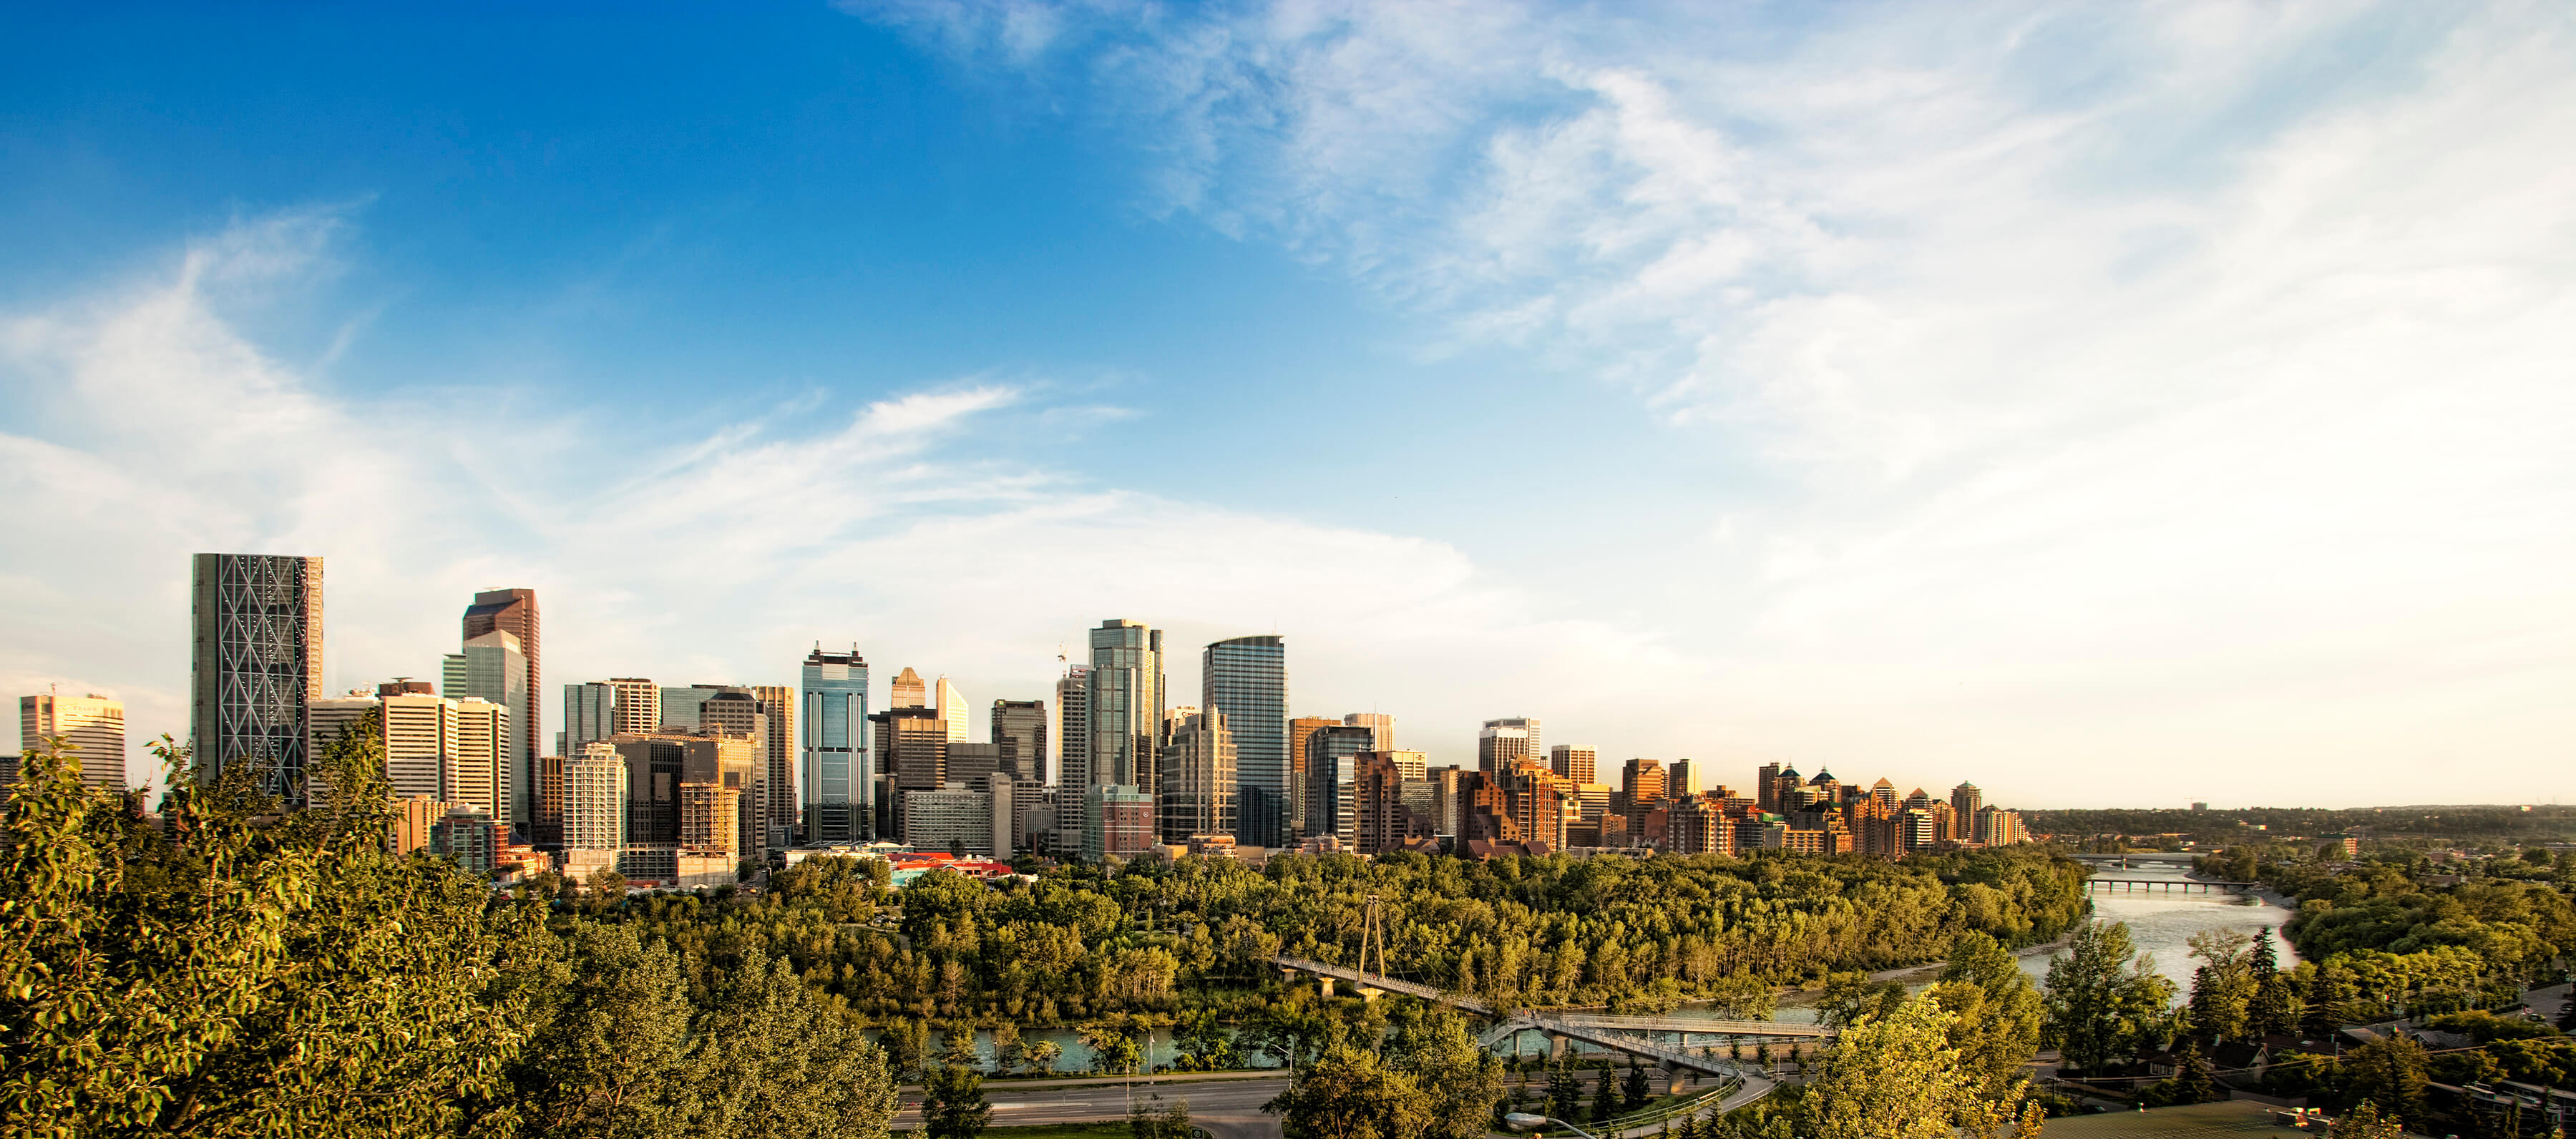 Top 5 Things To Do In Calgary During Your Parenting Time